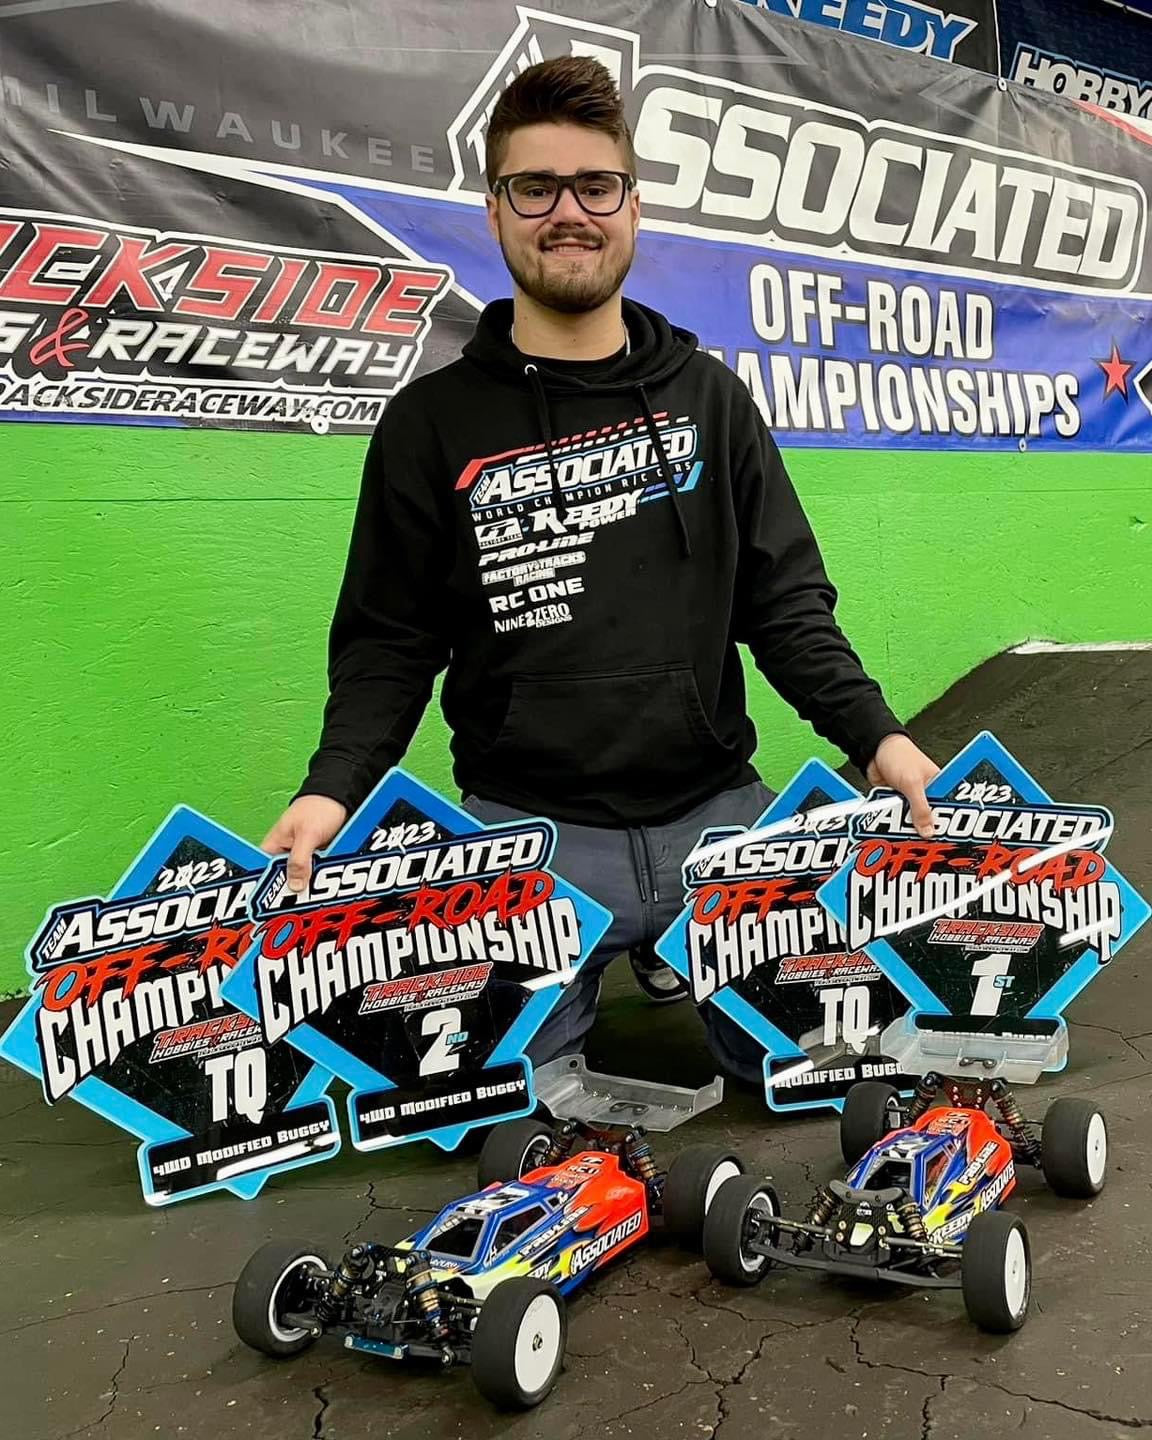 Congratulations to Aydin Horne having an awesome weekend at trackside